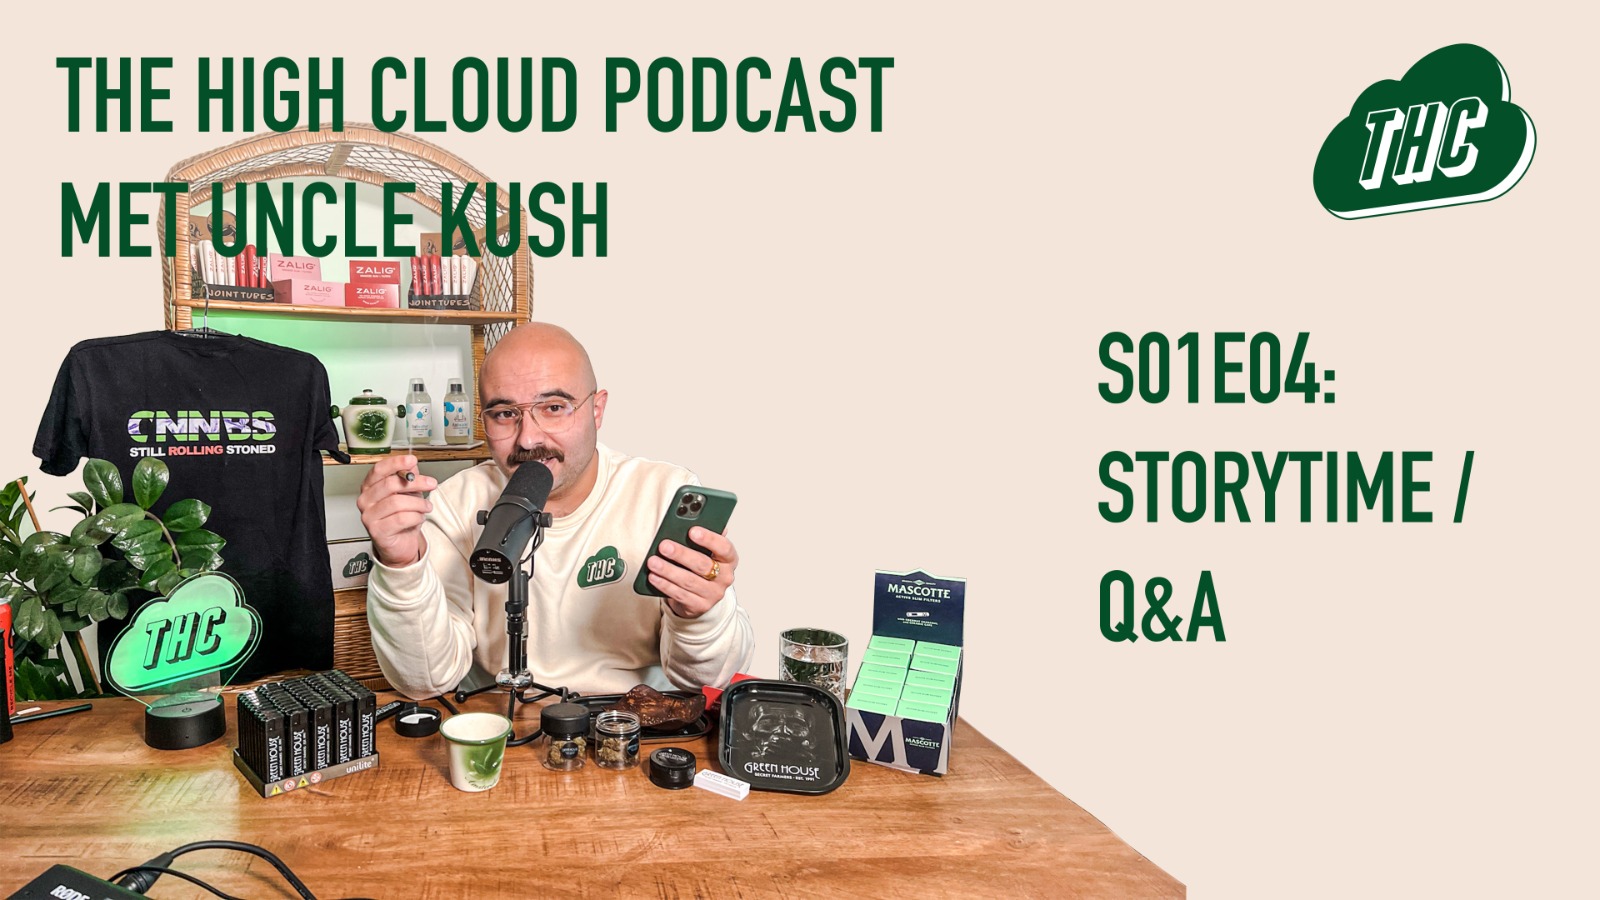 The High Cloud Podcast S01E04: Storytime / Q&A met Uncle Kush